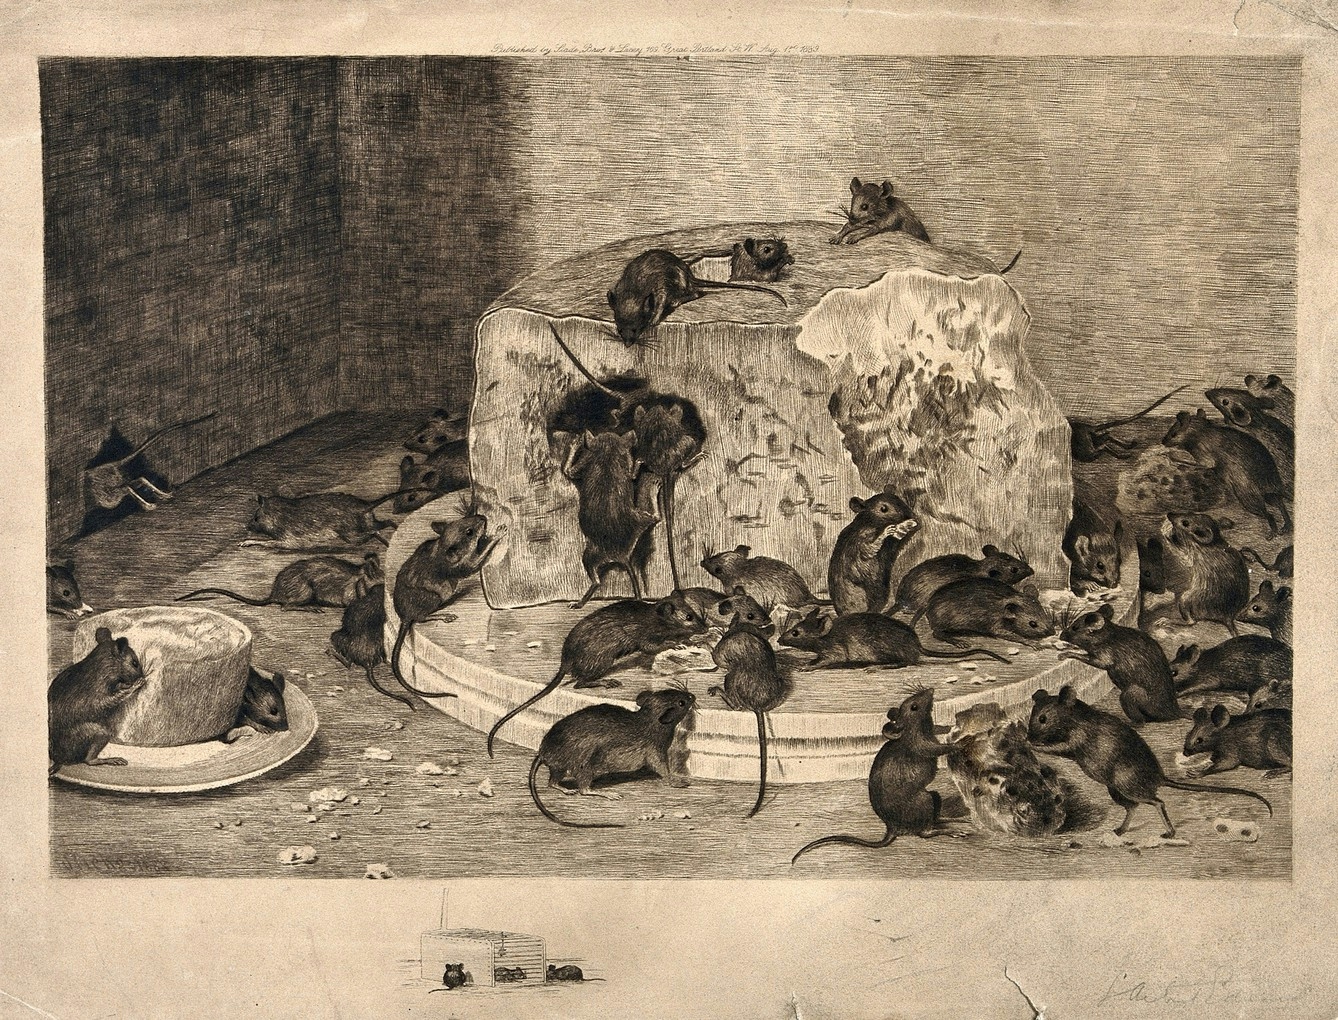 Sketch on sepia background of many mice nibbling at a large block of cheese